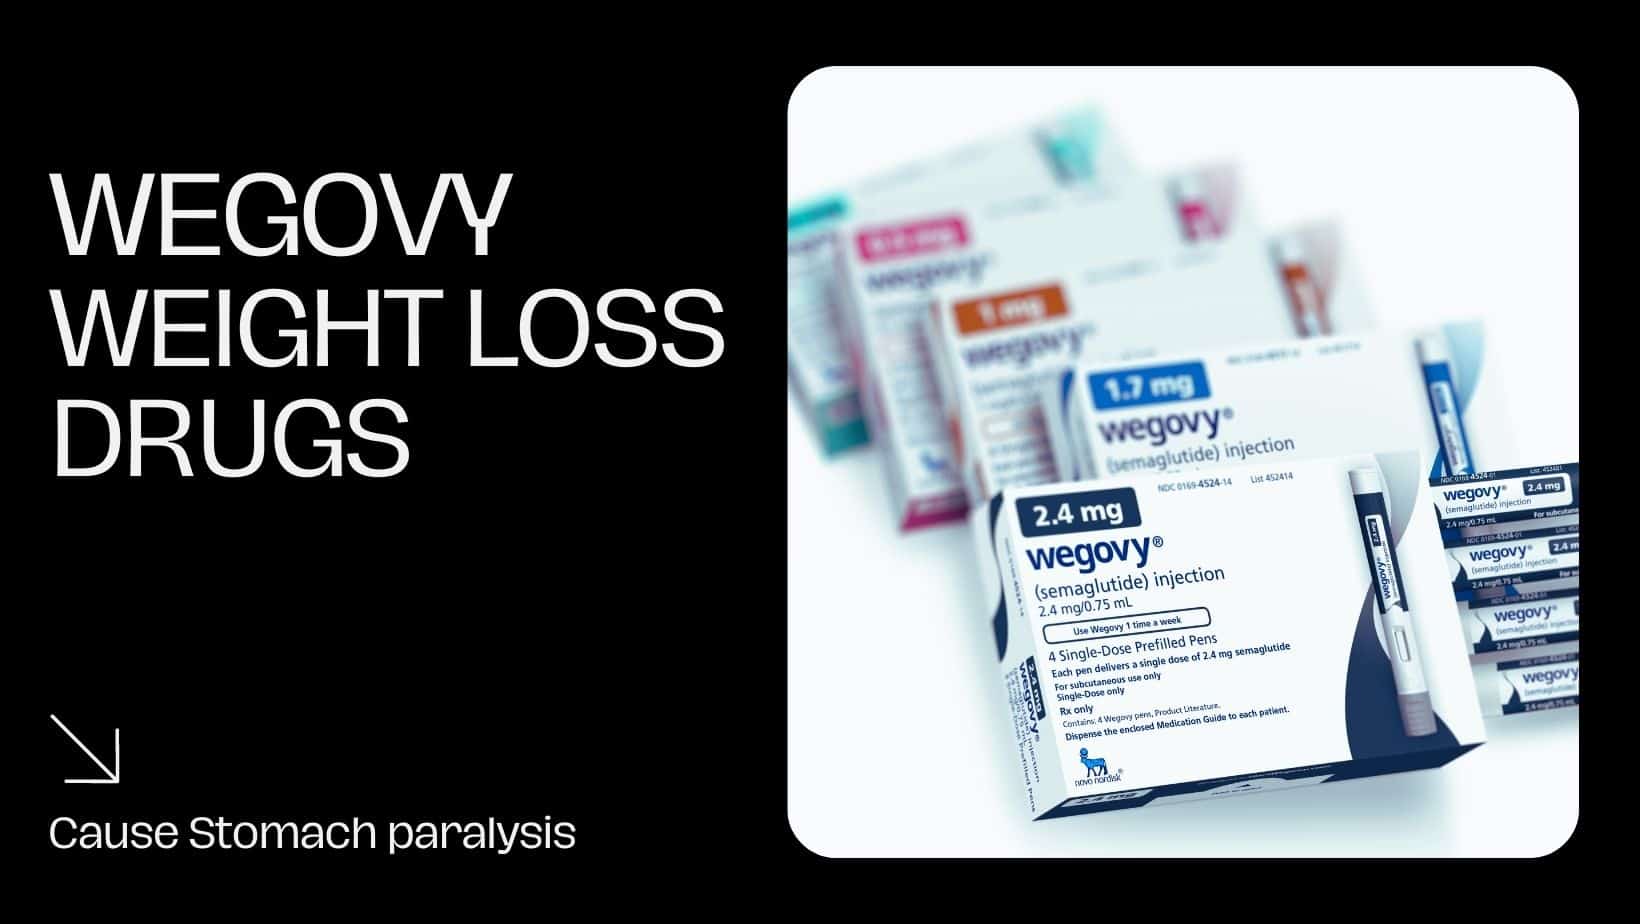 Ozempic and Wegovy Weight Loss Drugs Cause Stomach paralysis